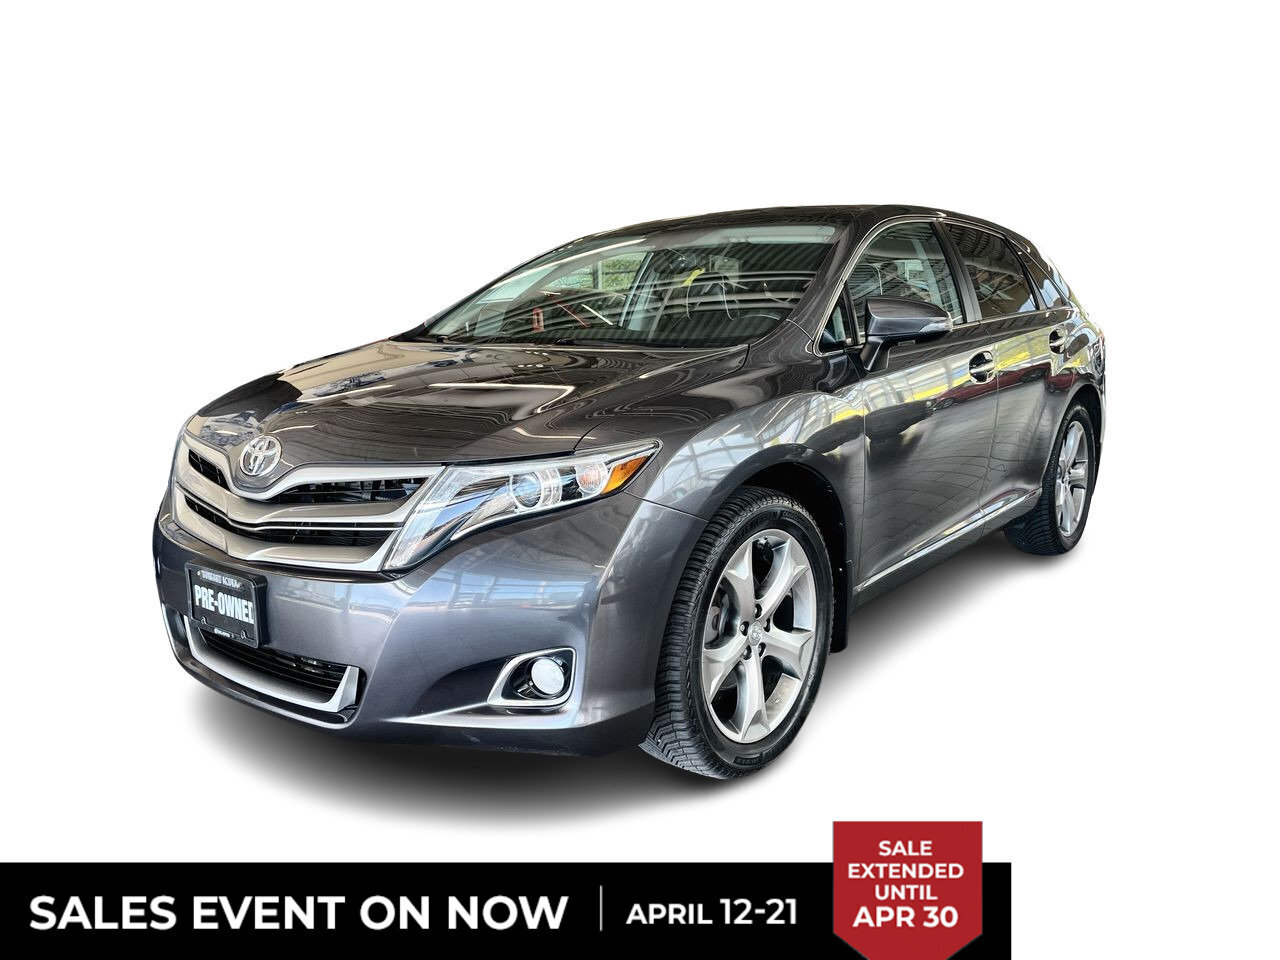 2014 Toyota Venza V6 AWD | Low KMs | Limited Package | Local |